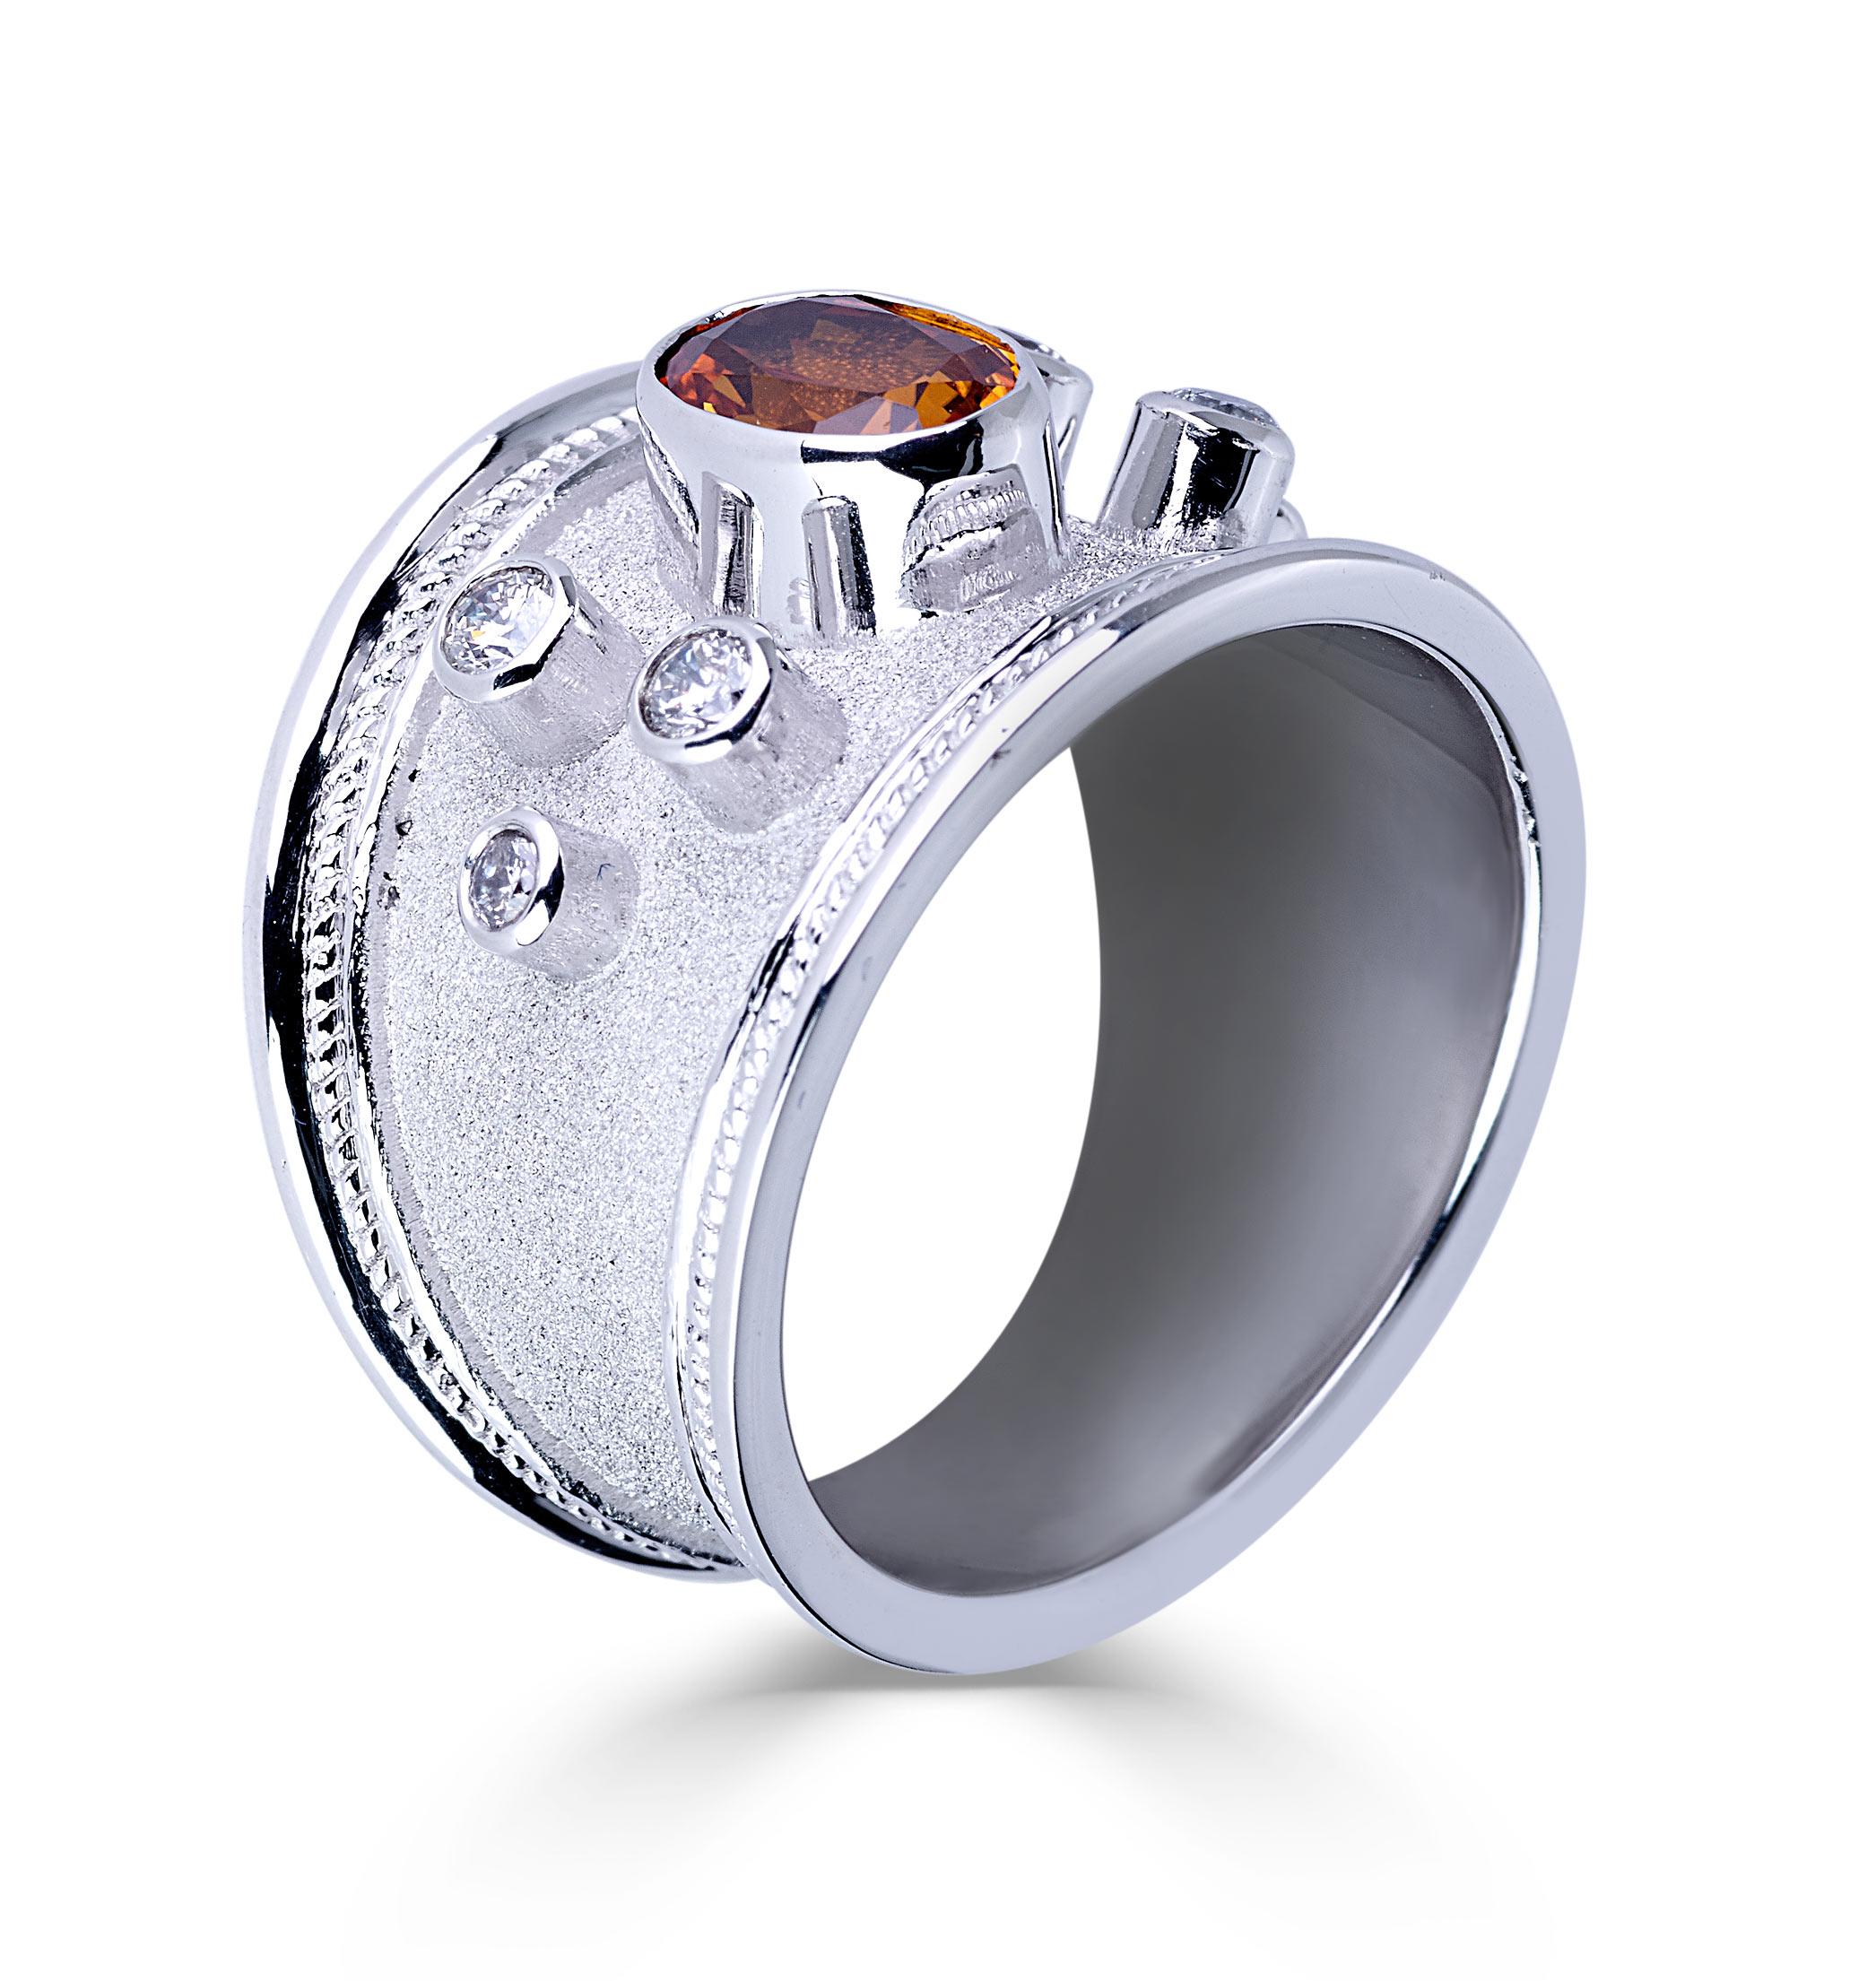 Oval Cut Georgios Collections 18 Karat White Gold Diamond Band Ring with Orange Sapphire